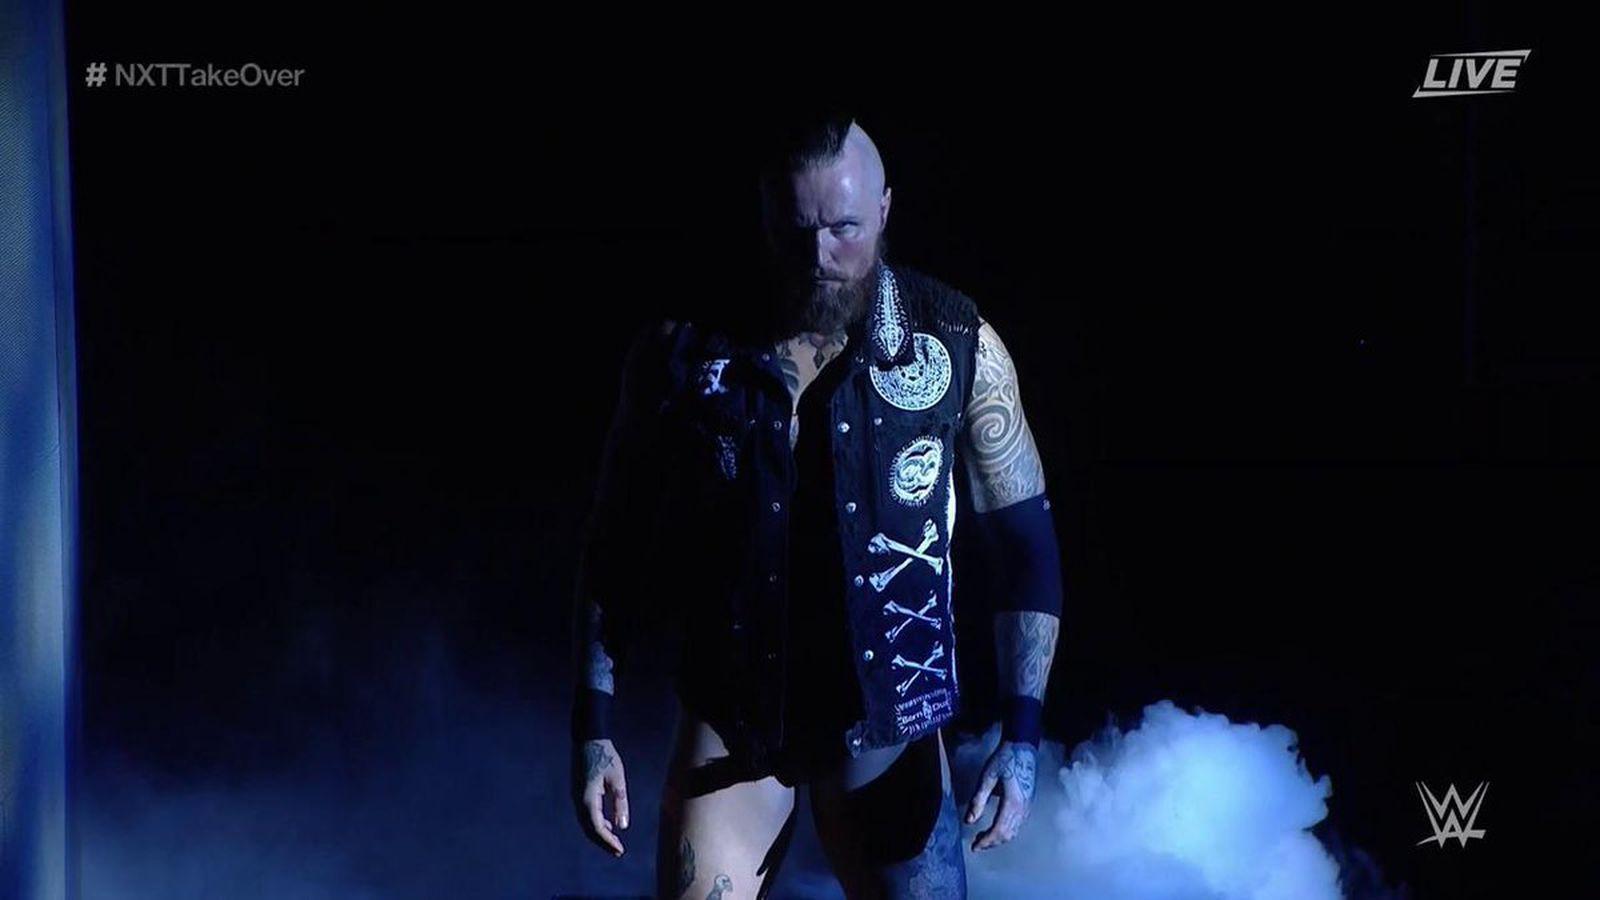 So, Aleister Black's entrance rules